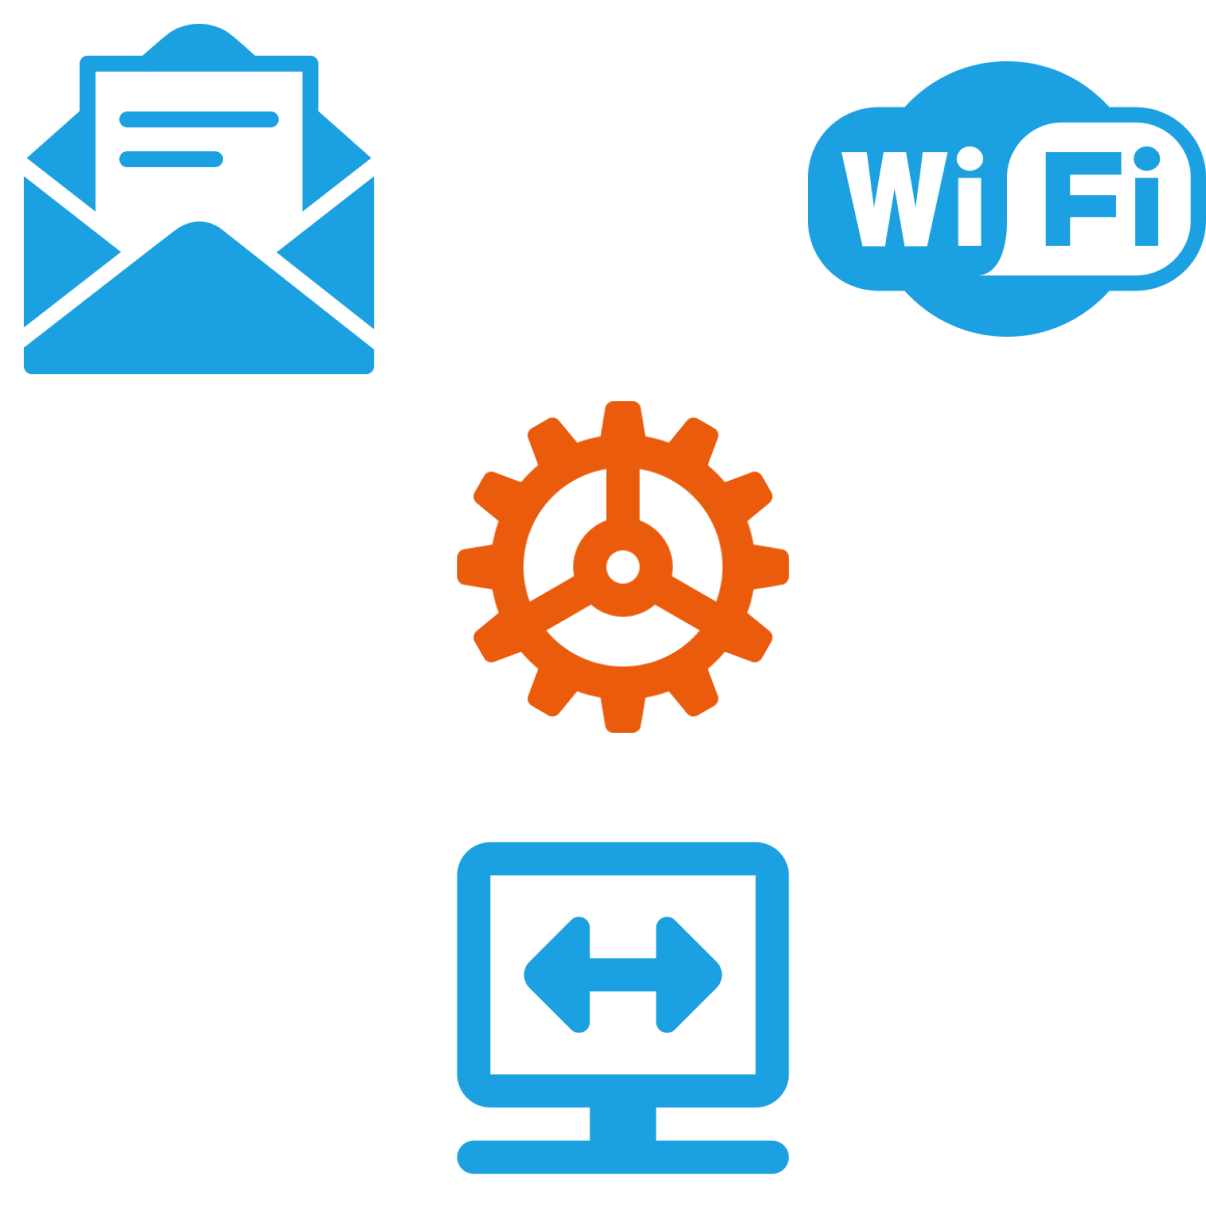 WiFi, VPN & email configurations